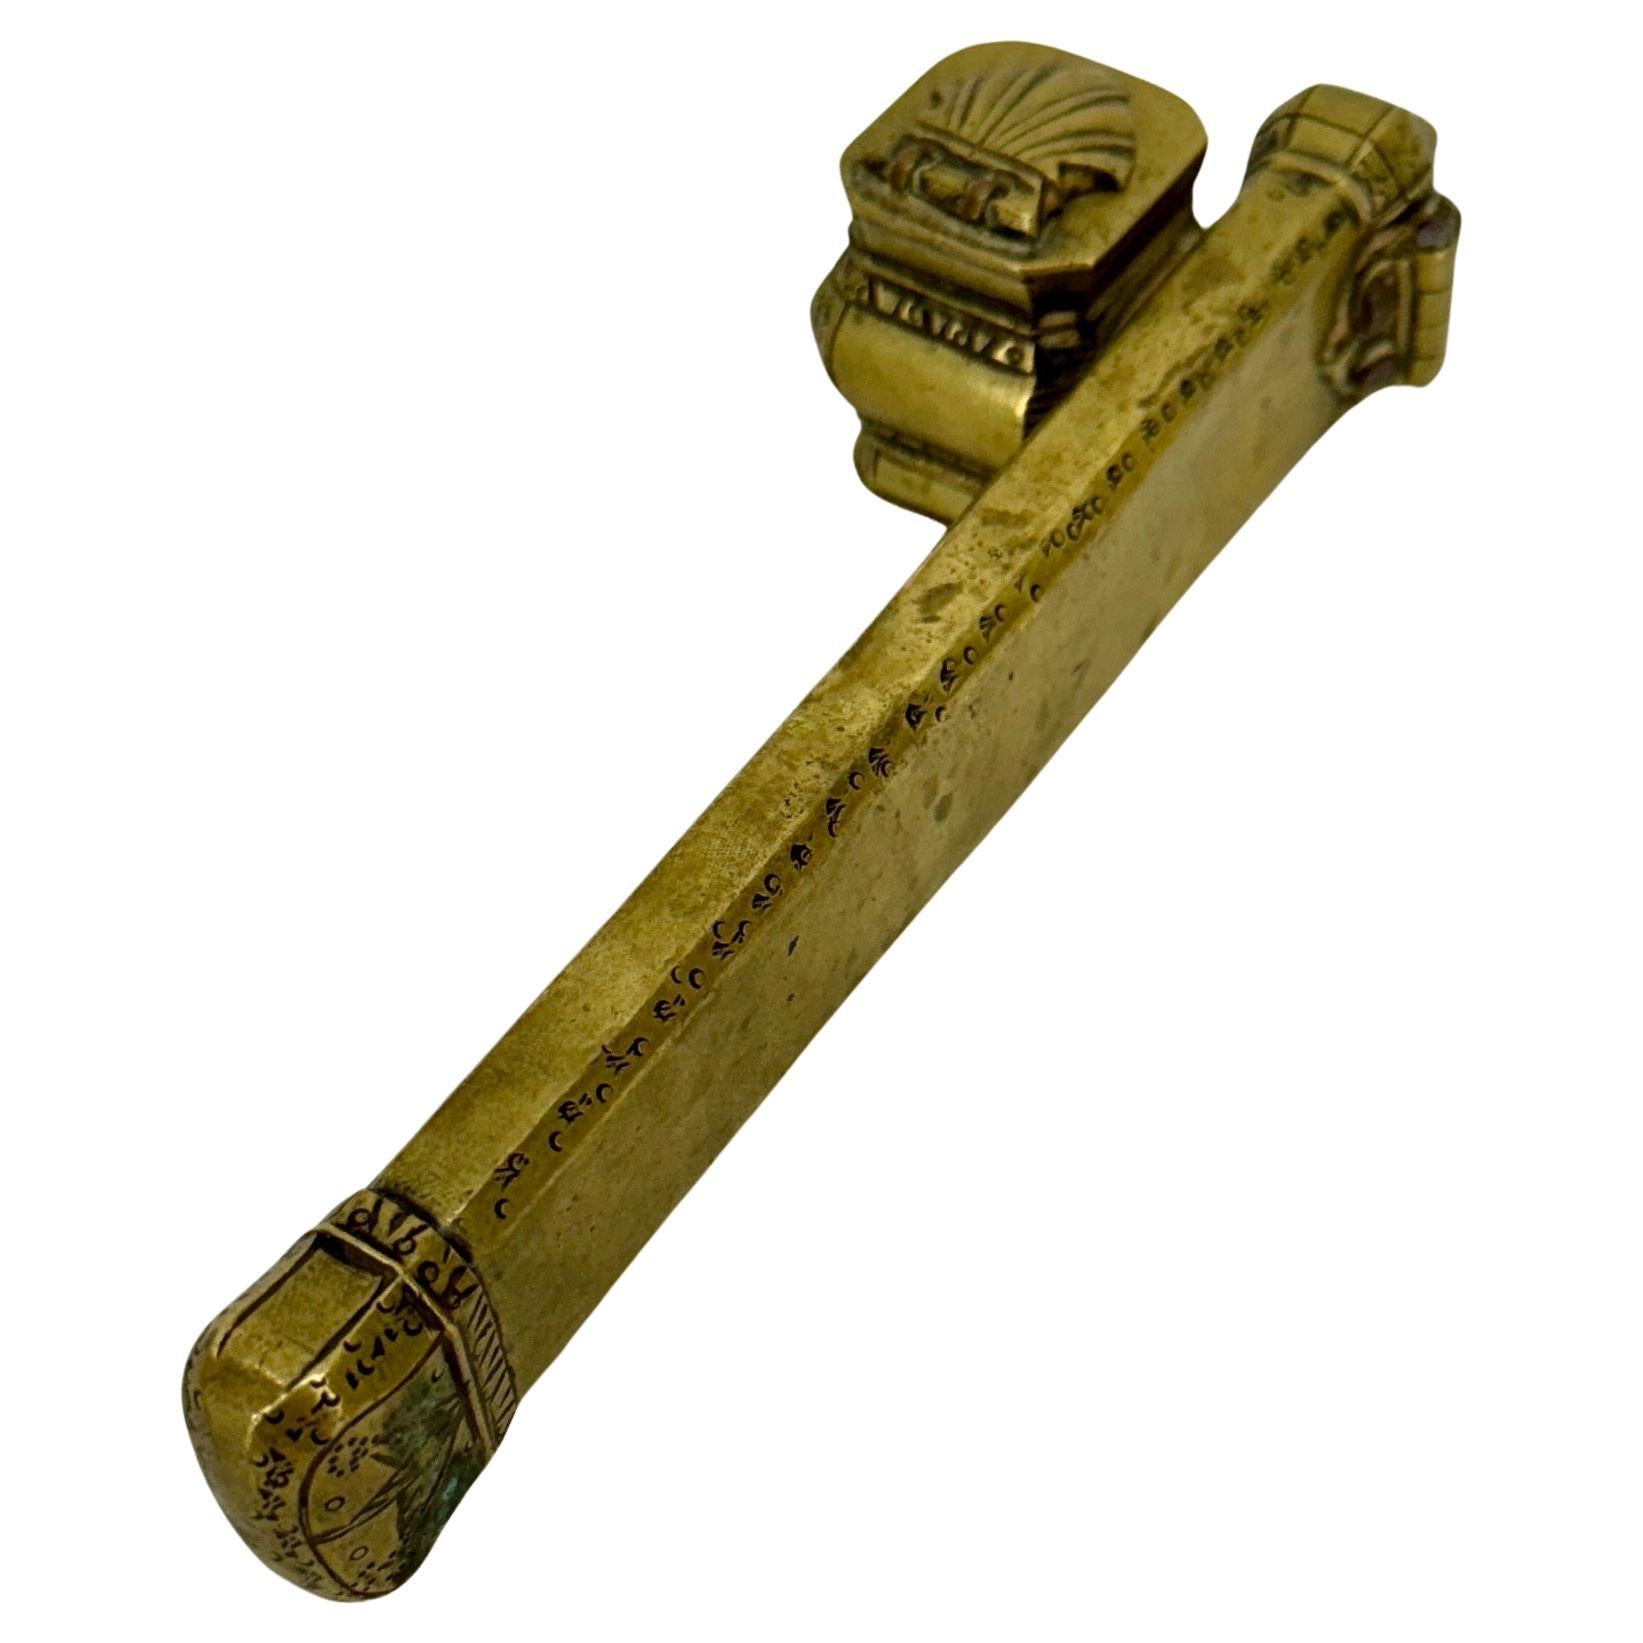 Antique Turkish Brass Pencil Case Qalamdan and Inkwell From The Ottoman Empire

The interior of the brass case is divided into compartments to hold writing tools such as quills and pencils. The compartments are designed to keep the the writing tools